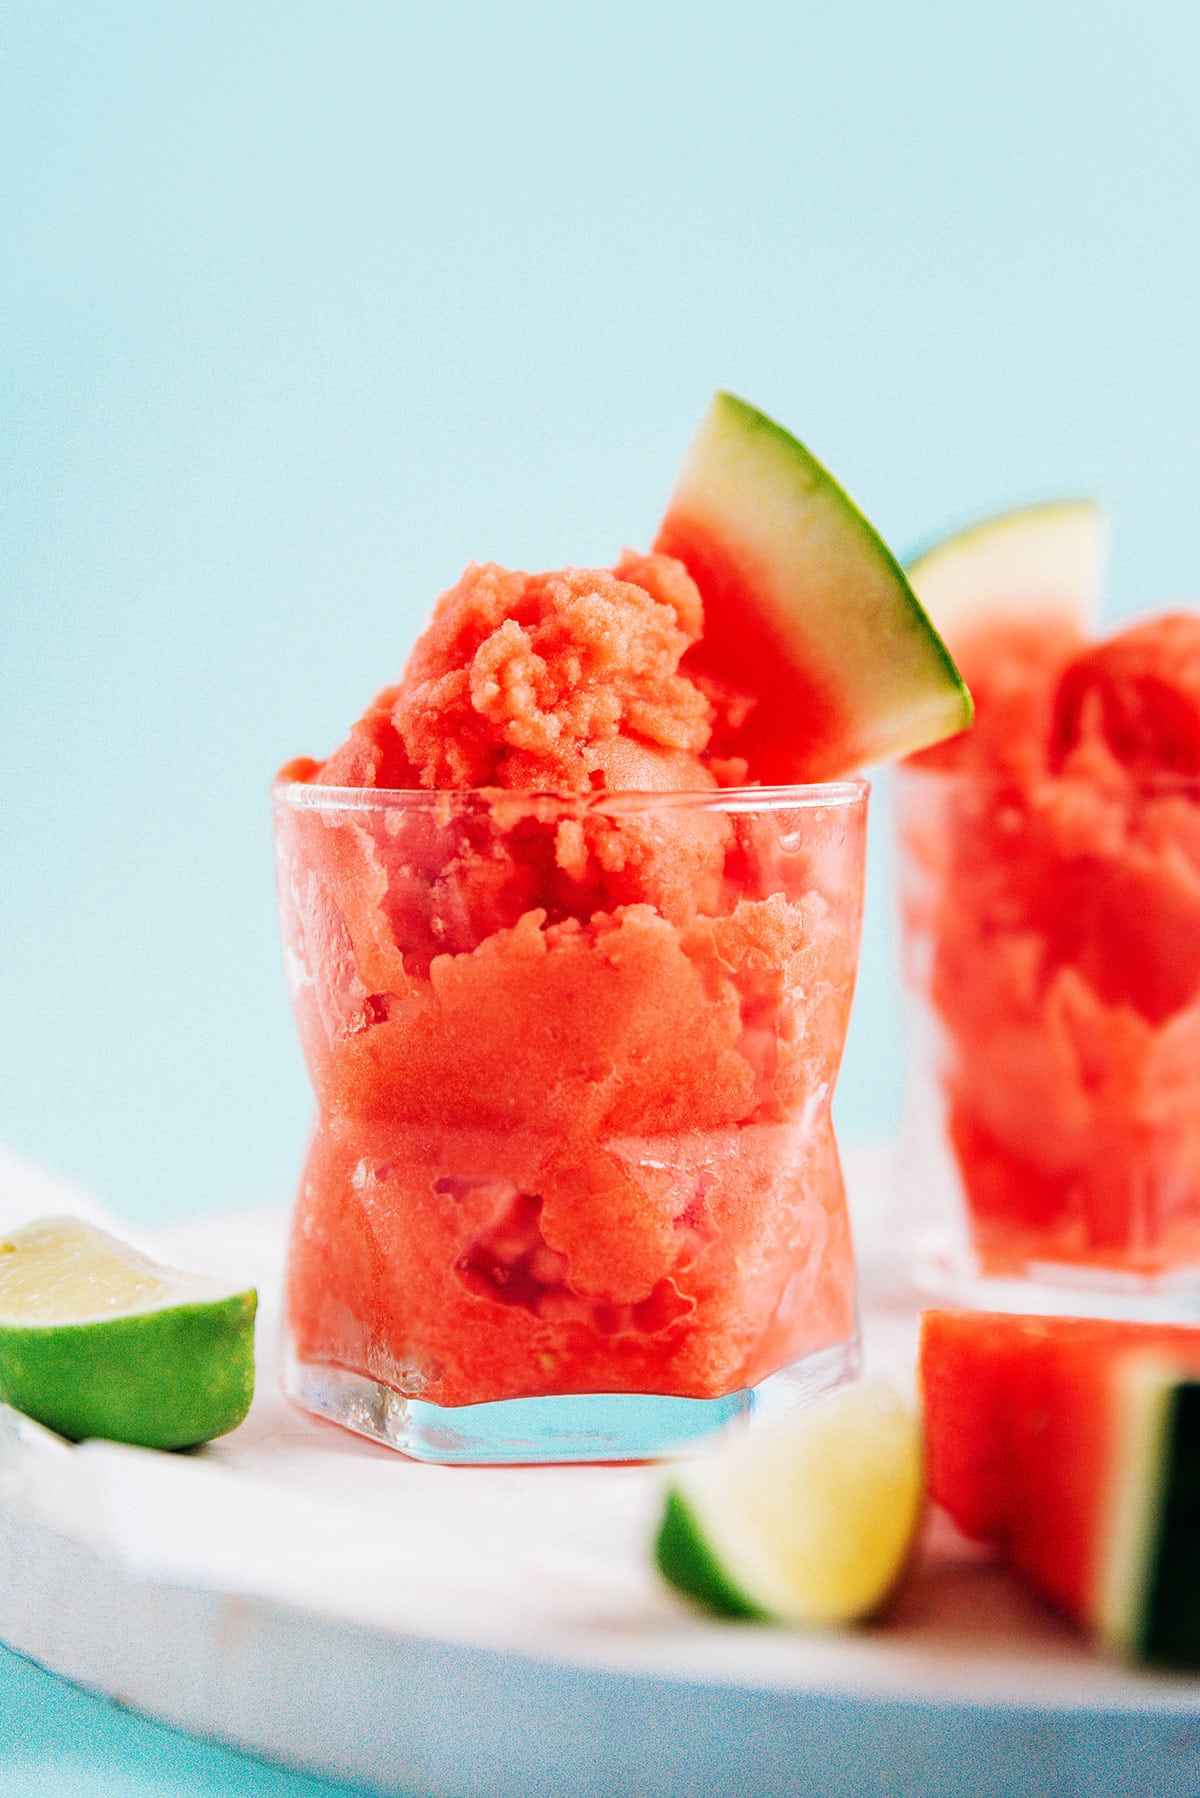 A short glass filled with watermelon sorbet and a small slice of watermelon.